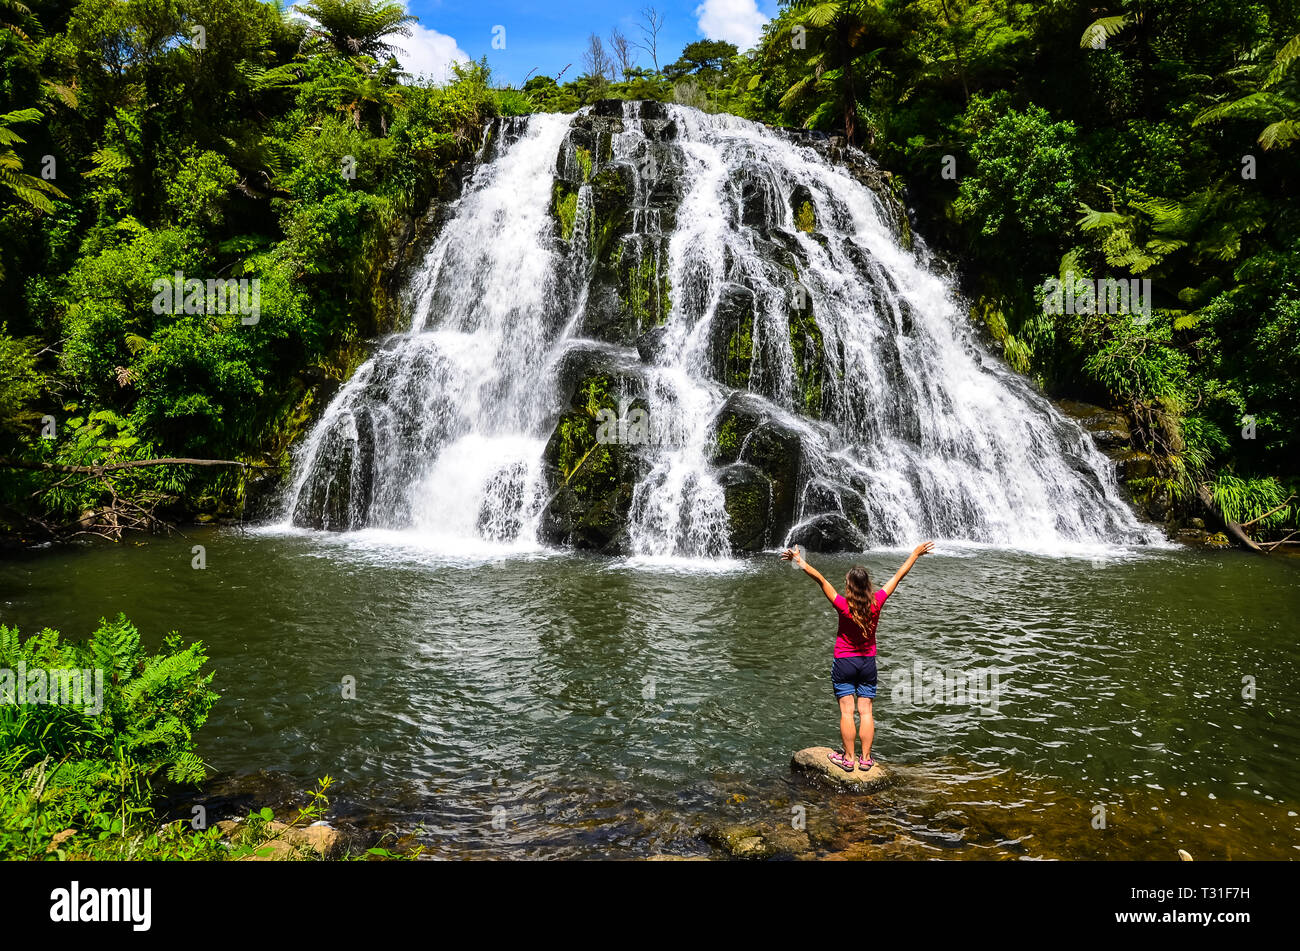 Owharoa Falls with blue sky above and girl tourist person in red t-shirt in the foreground at Coromandel Peninsula, North Island, New Zealand Stock Photo